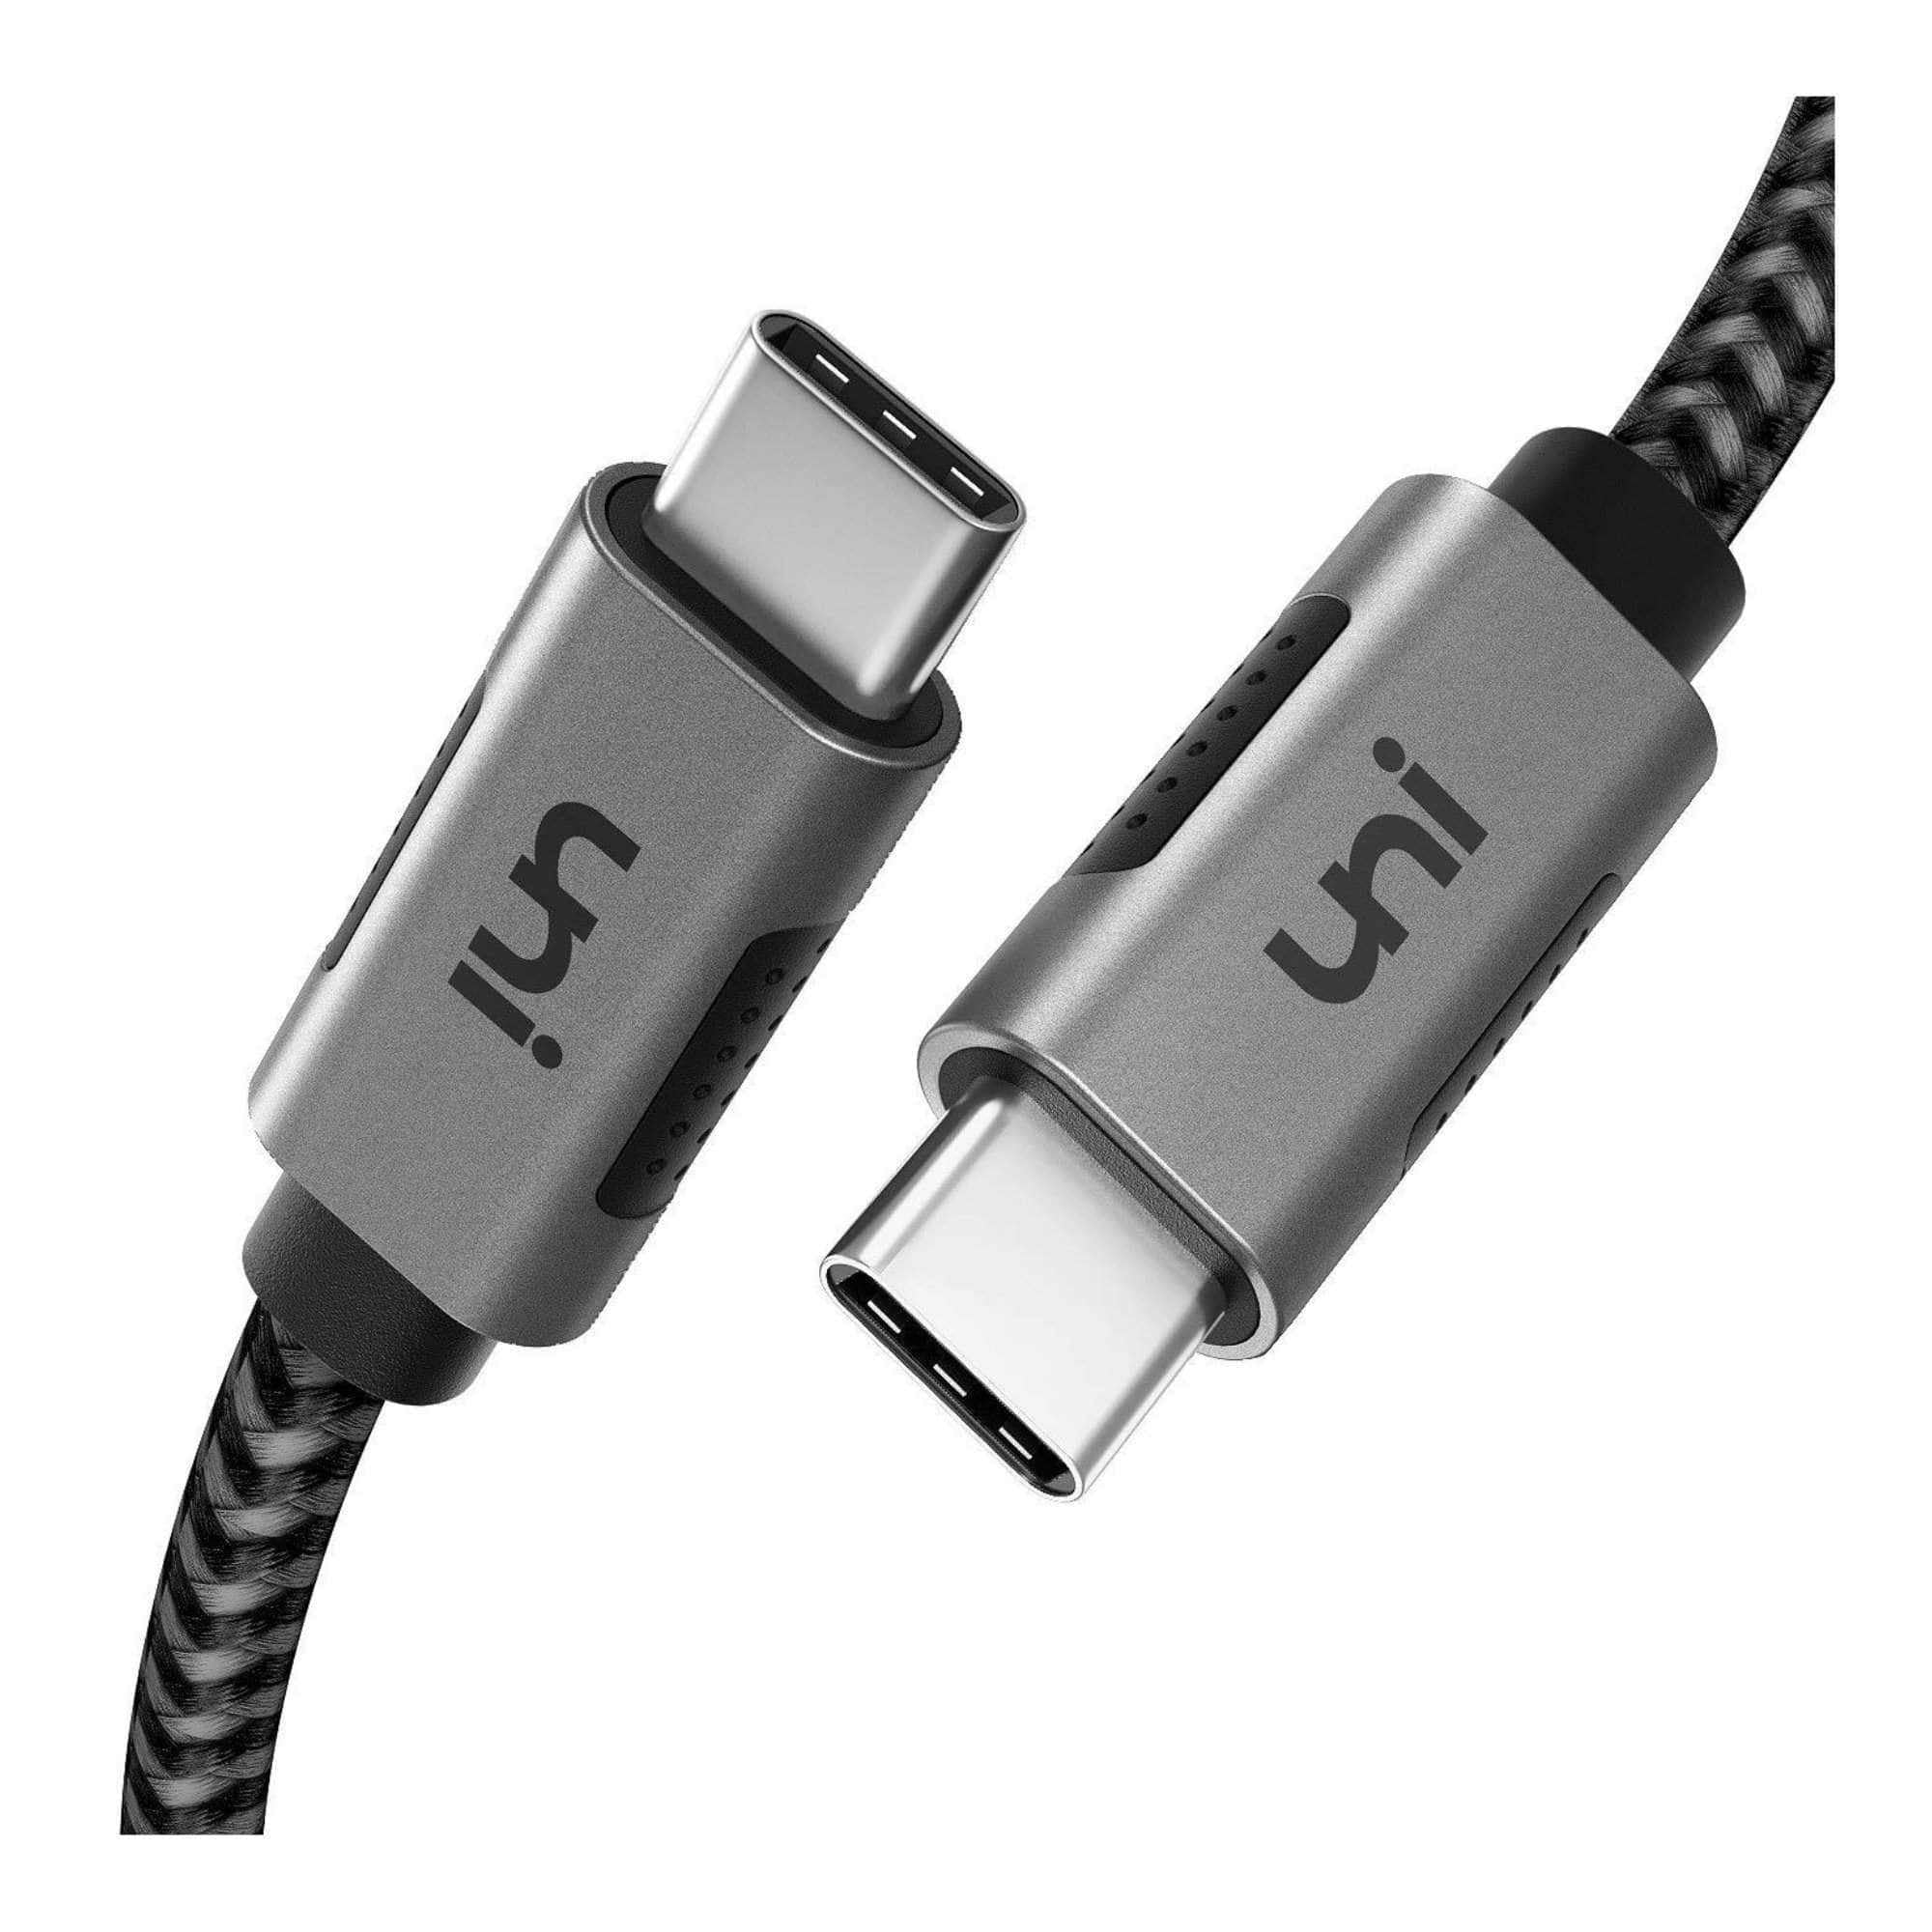 USB C Charger Cable, USB C to USB C Video Cable | uni